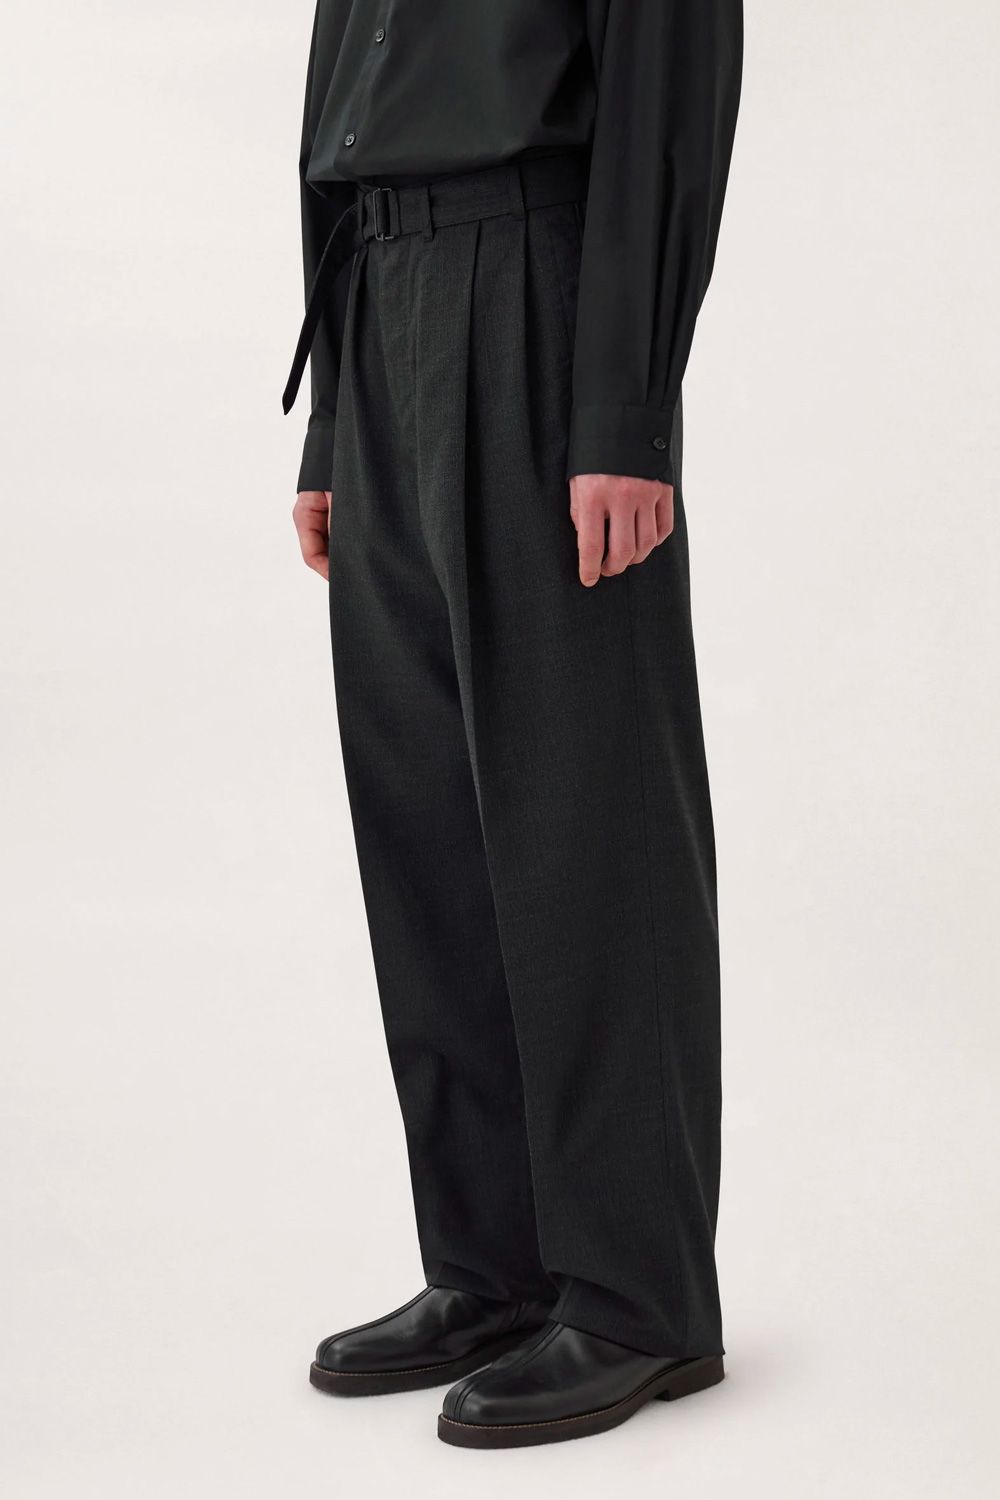 LEMAIRE 22AW LOOSE PLEATED PANTS 48 - 通販 - gofukuyasan.com